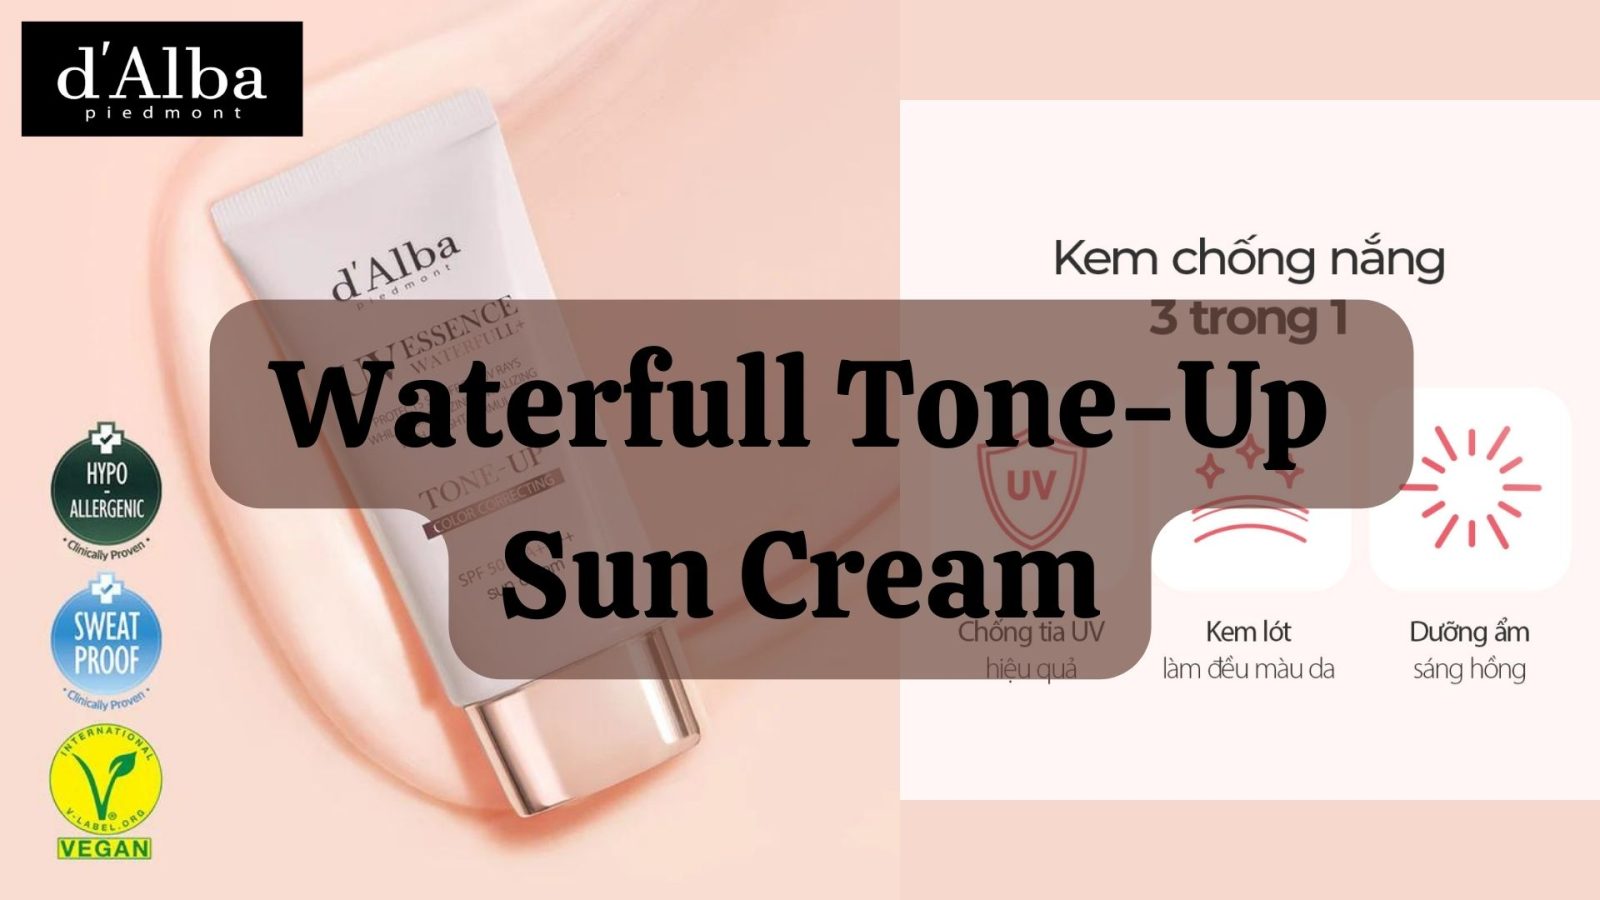 [Review] Kem Chống Nắng d'Alba Waterfull Tone-Up Sun Cream SPF50+PA++++ 1